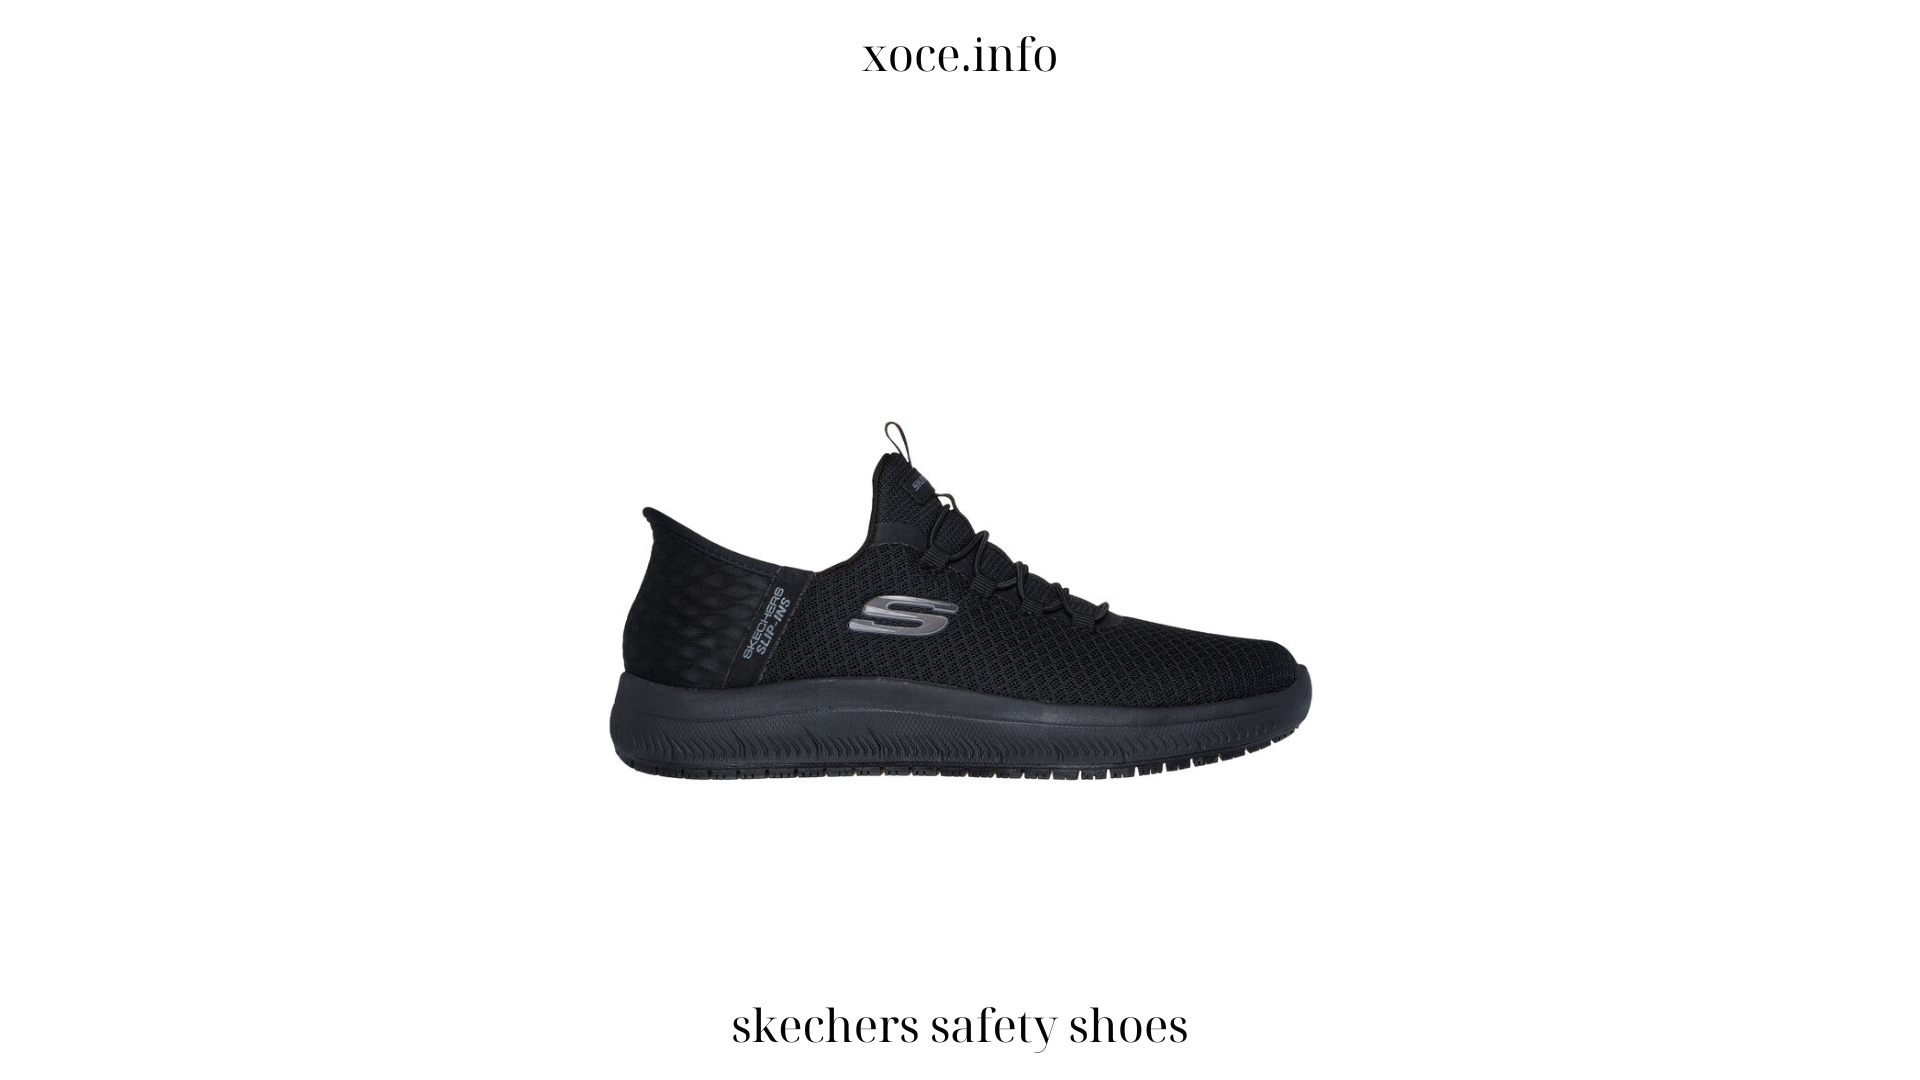 skechers safety shoes (1)